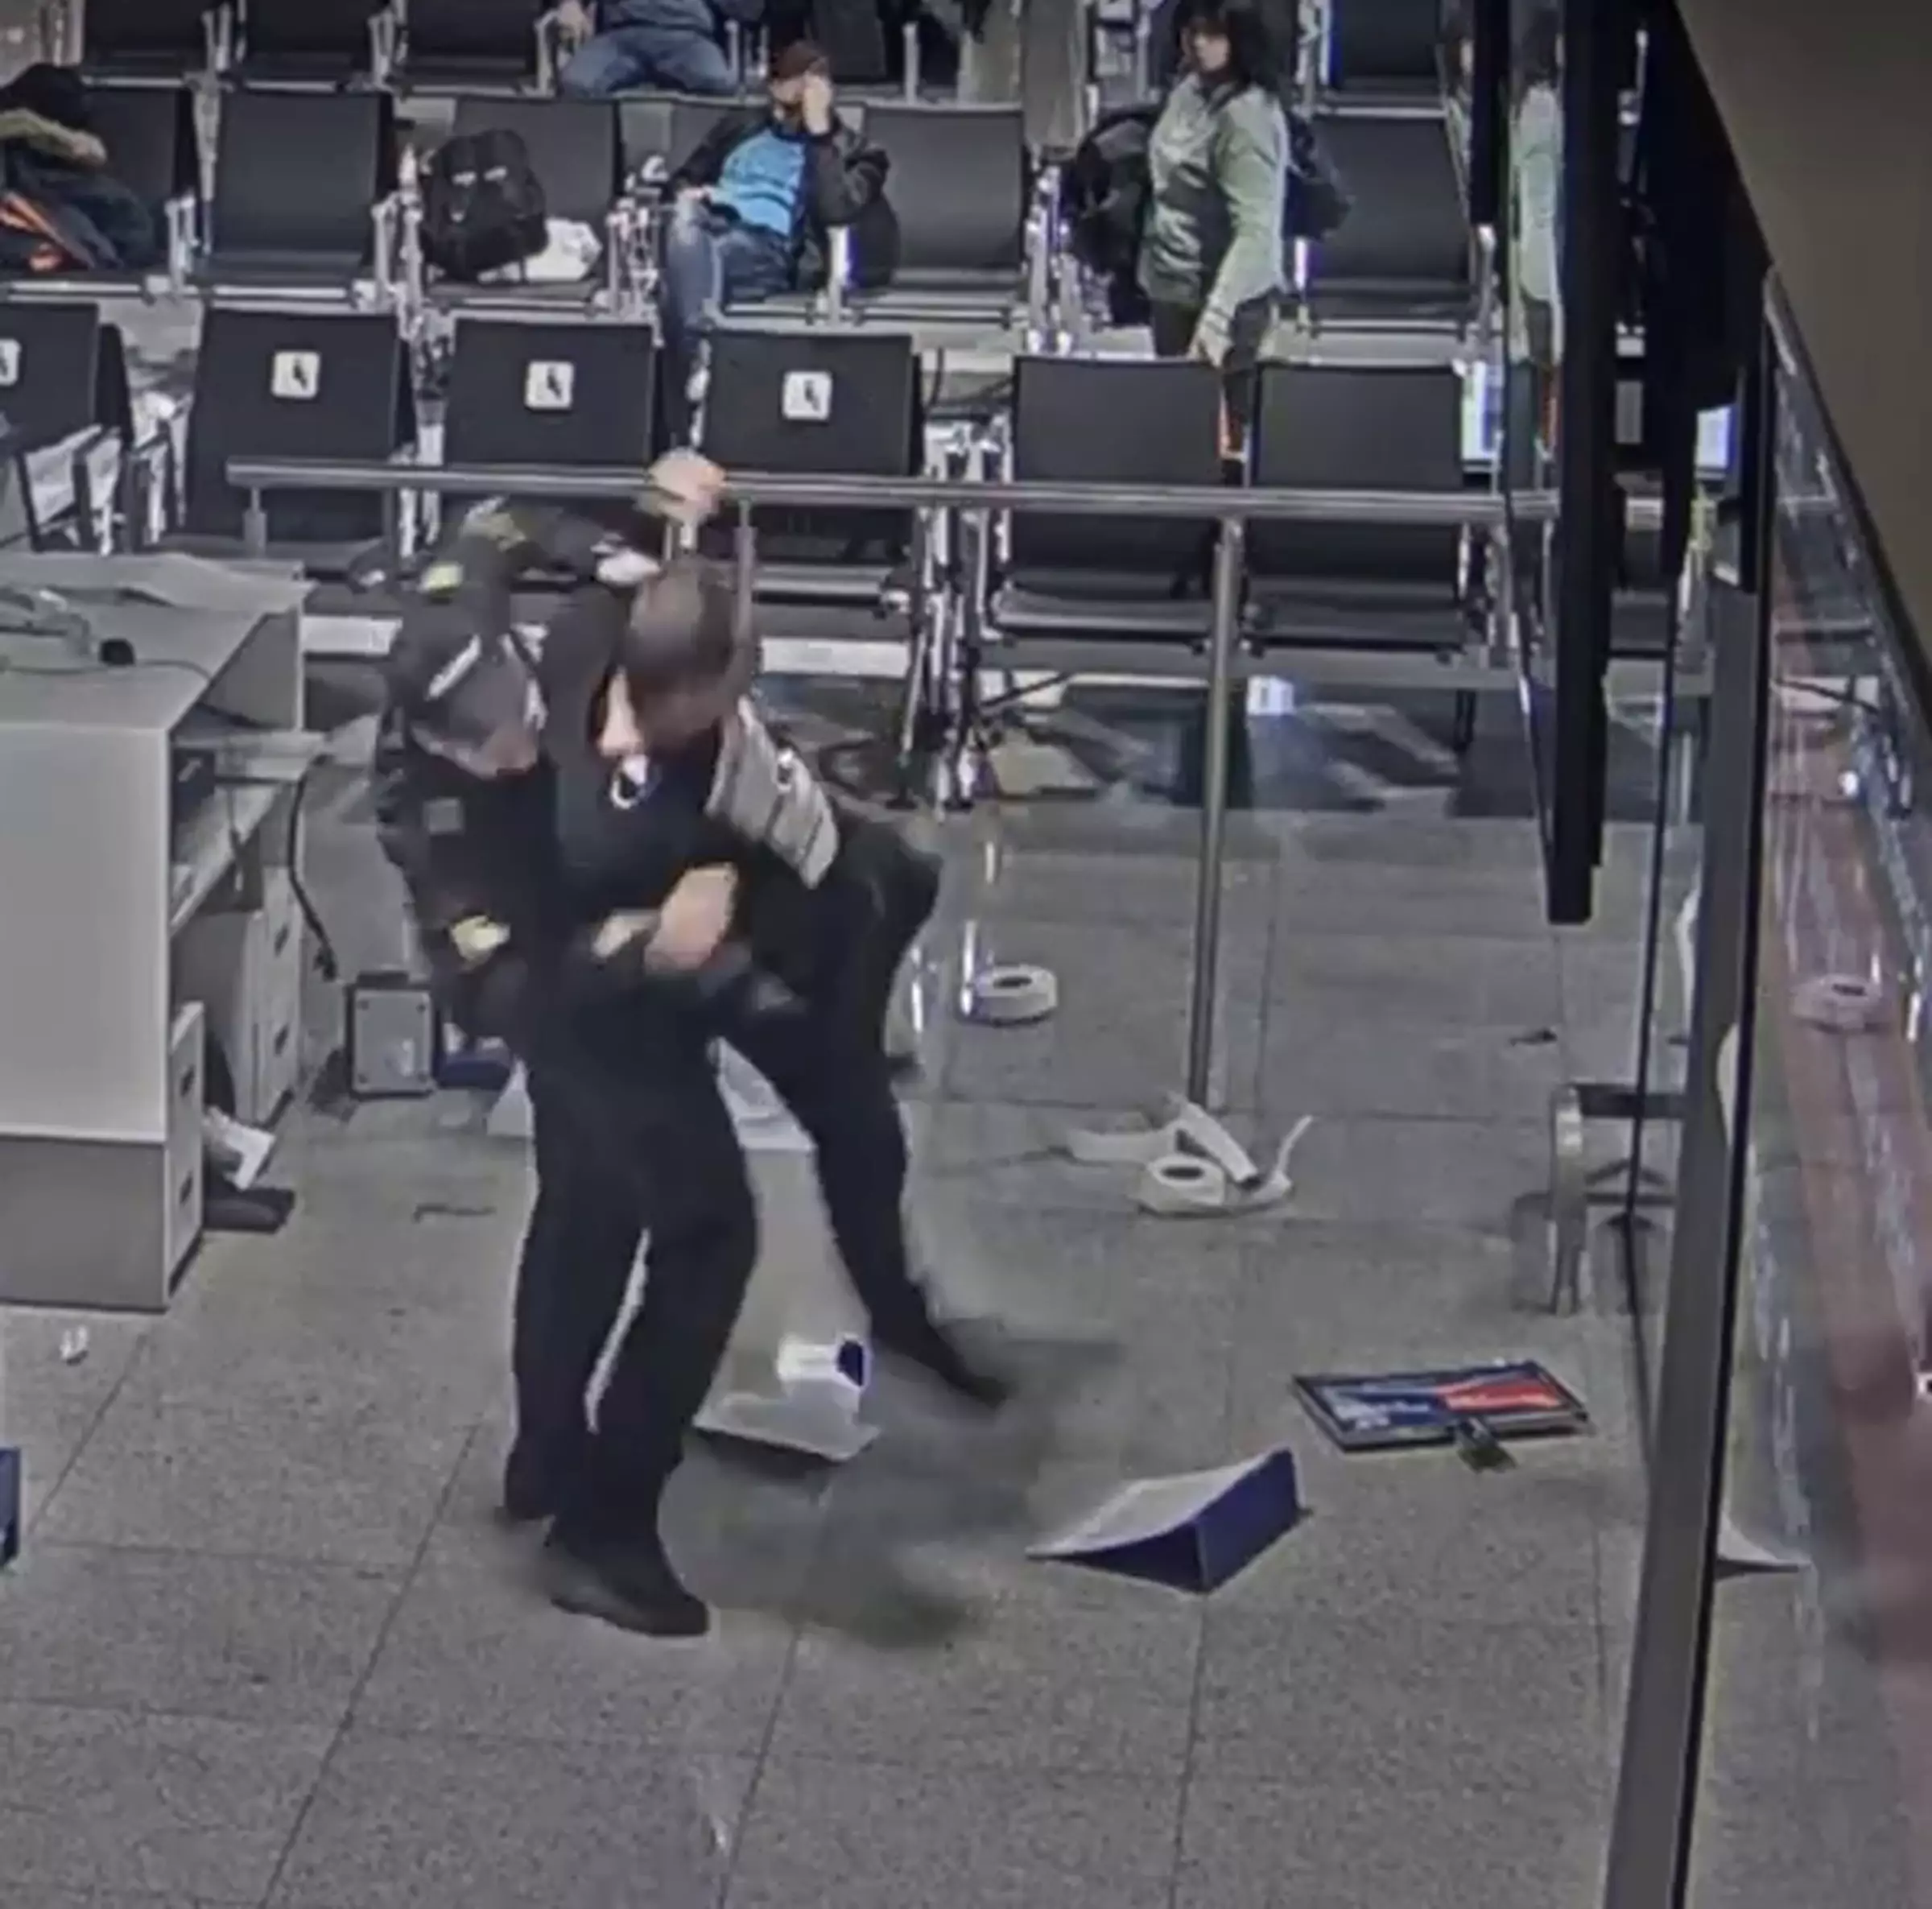 Airport security turned up and tackled the bloke to the floor.